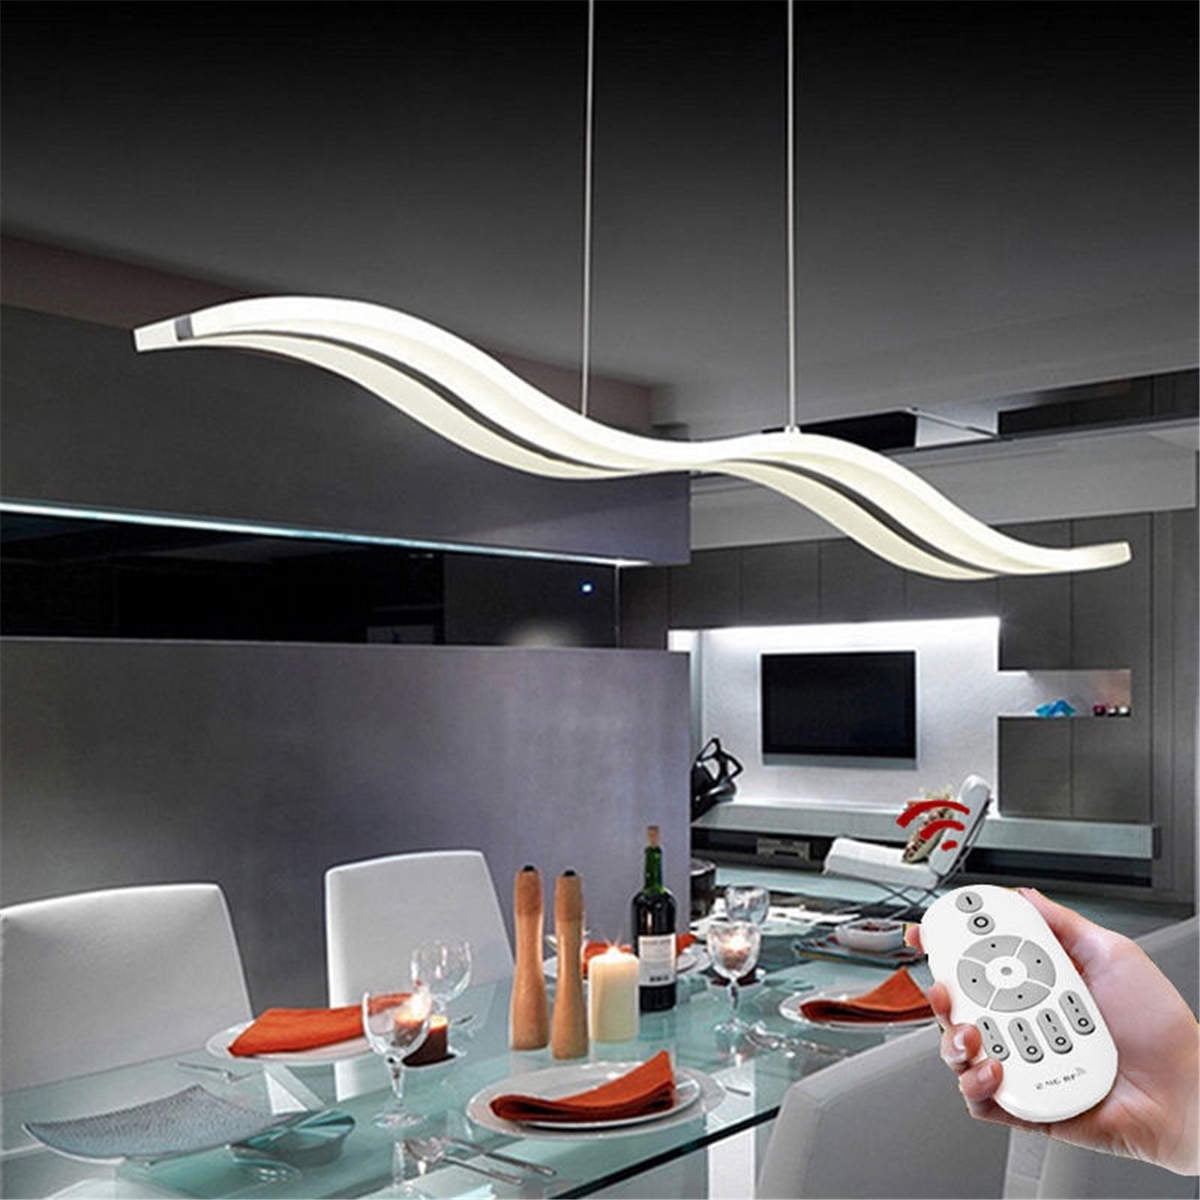 3500k 4500k,6000k HOUDES Modern LED Pendant Light Fixtures Island Lights Creative Chandeliers for Living Room Dinning Room Lighting Dimmable with Remote